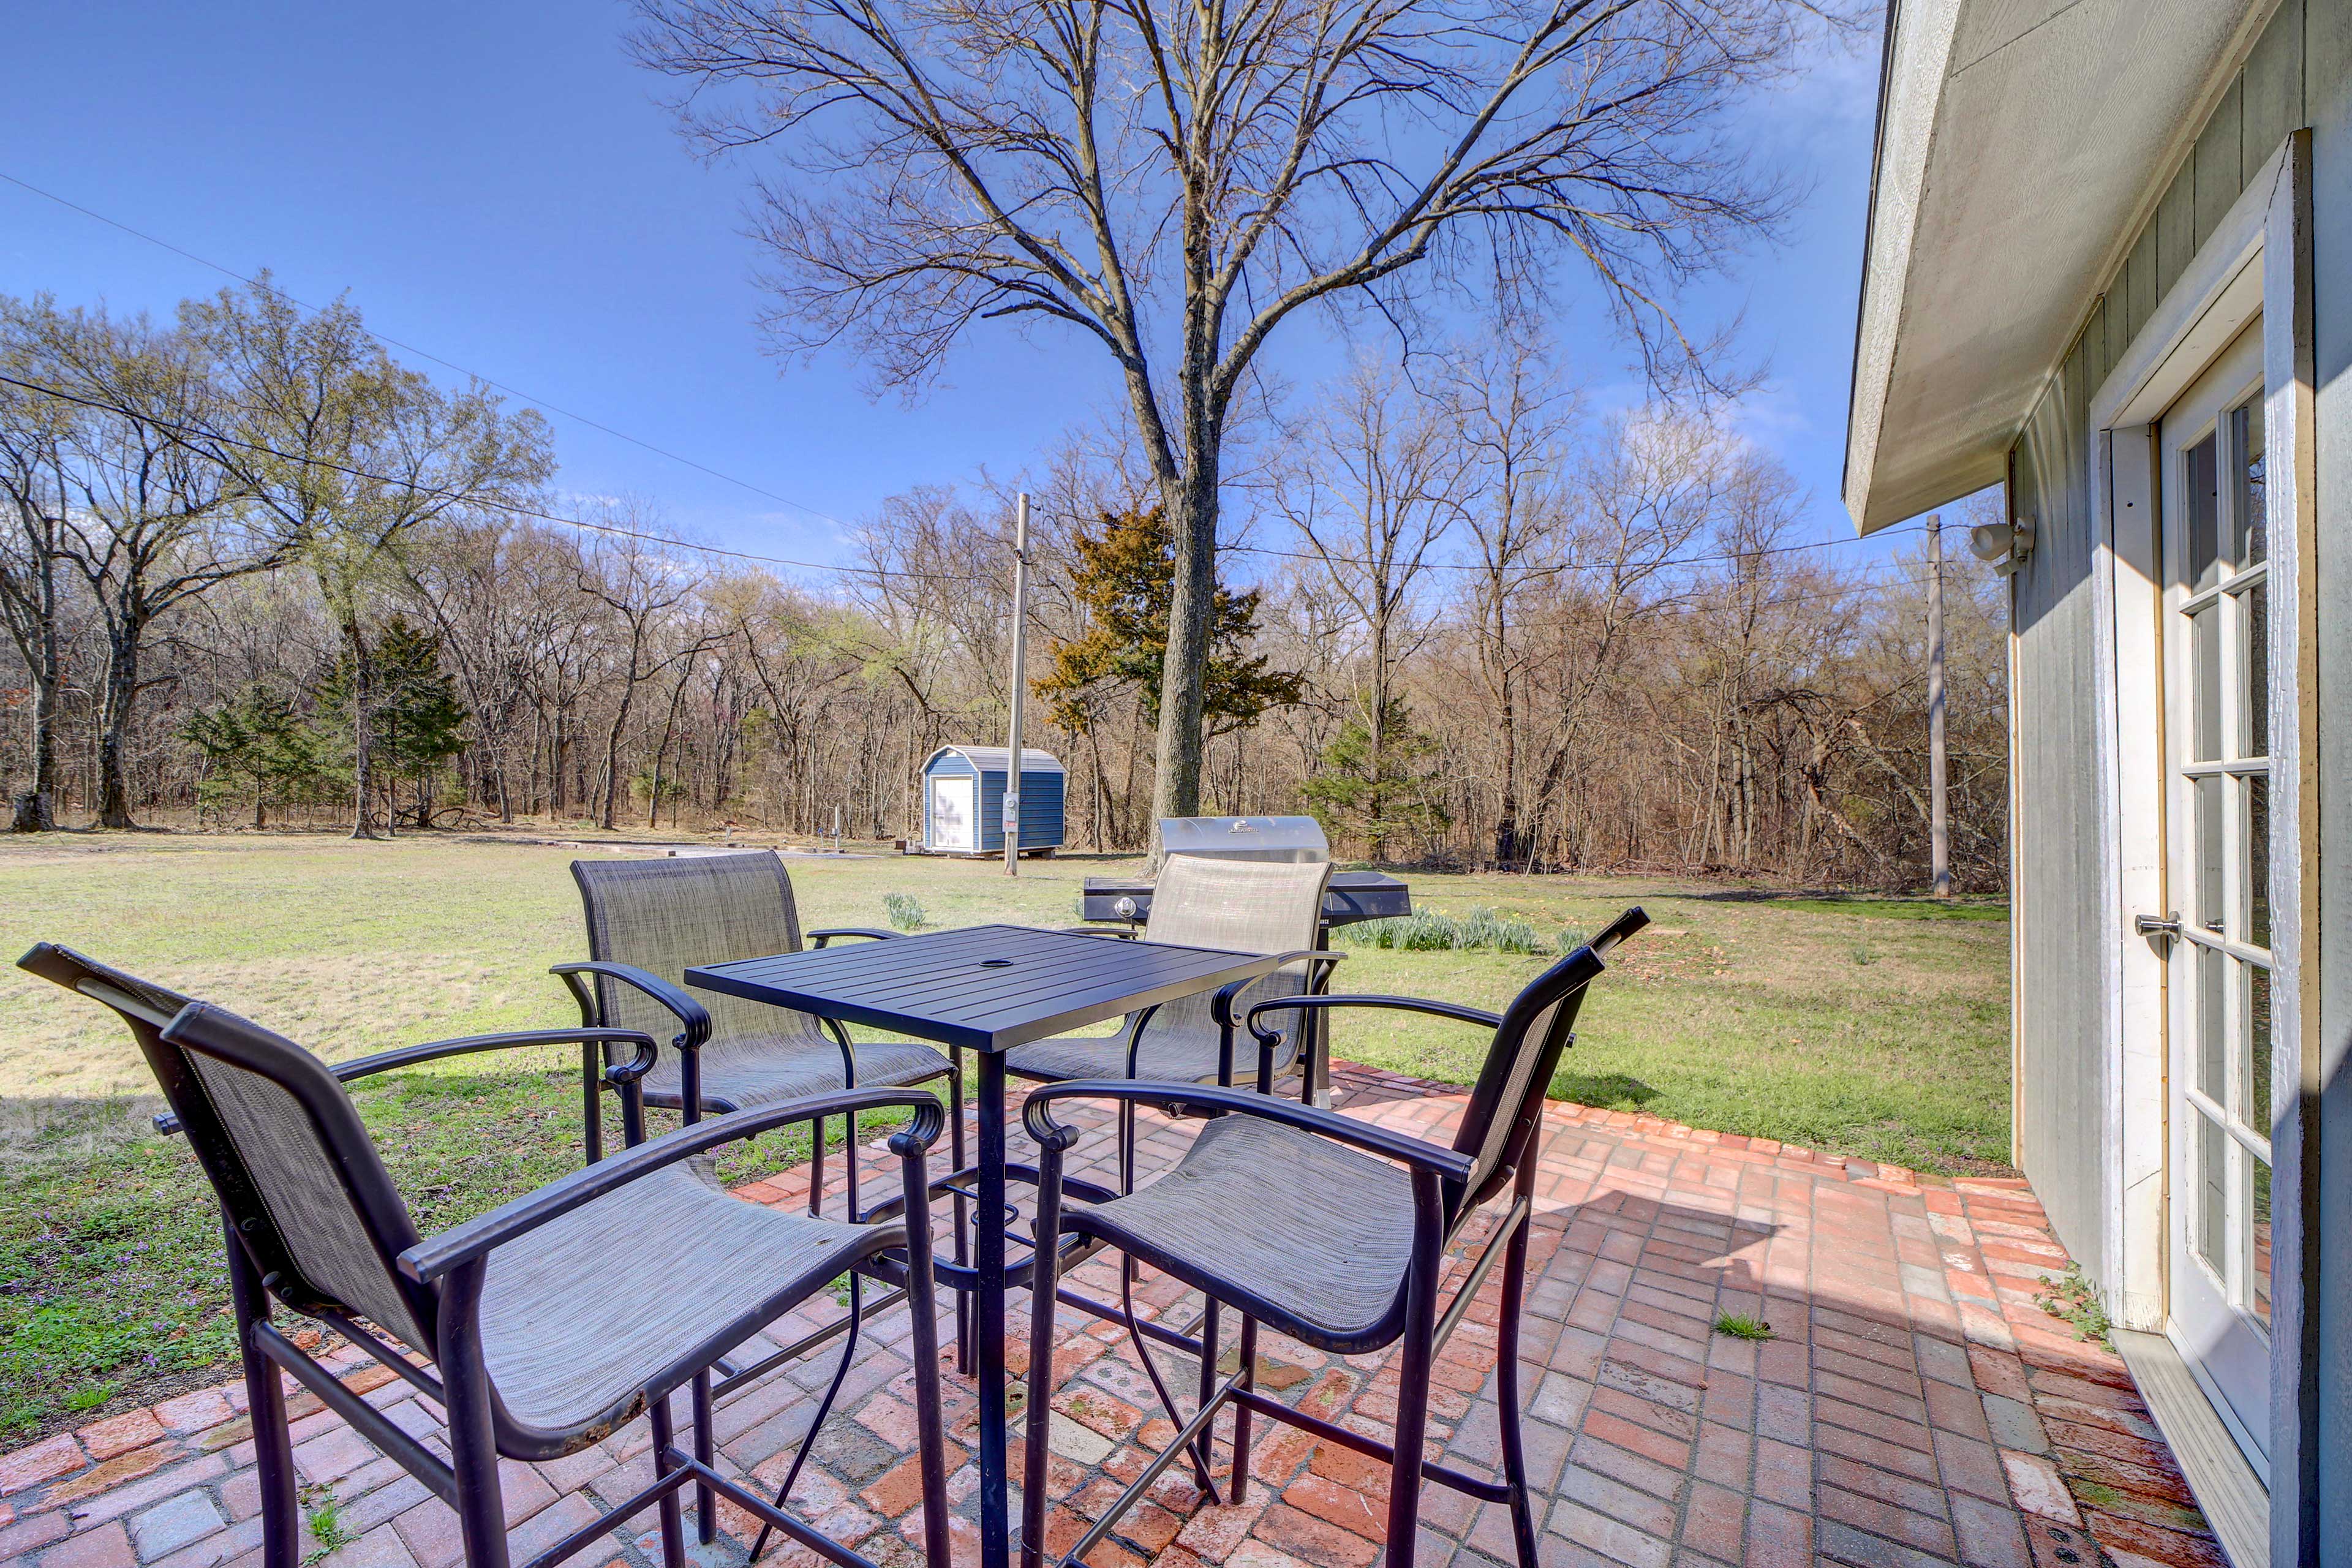 Private Patio | Gas Grill (BYOP)